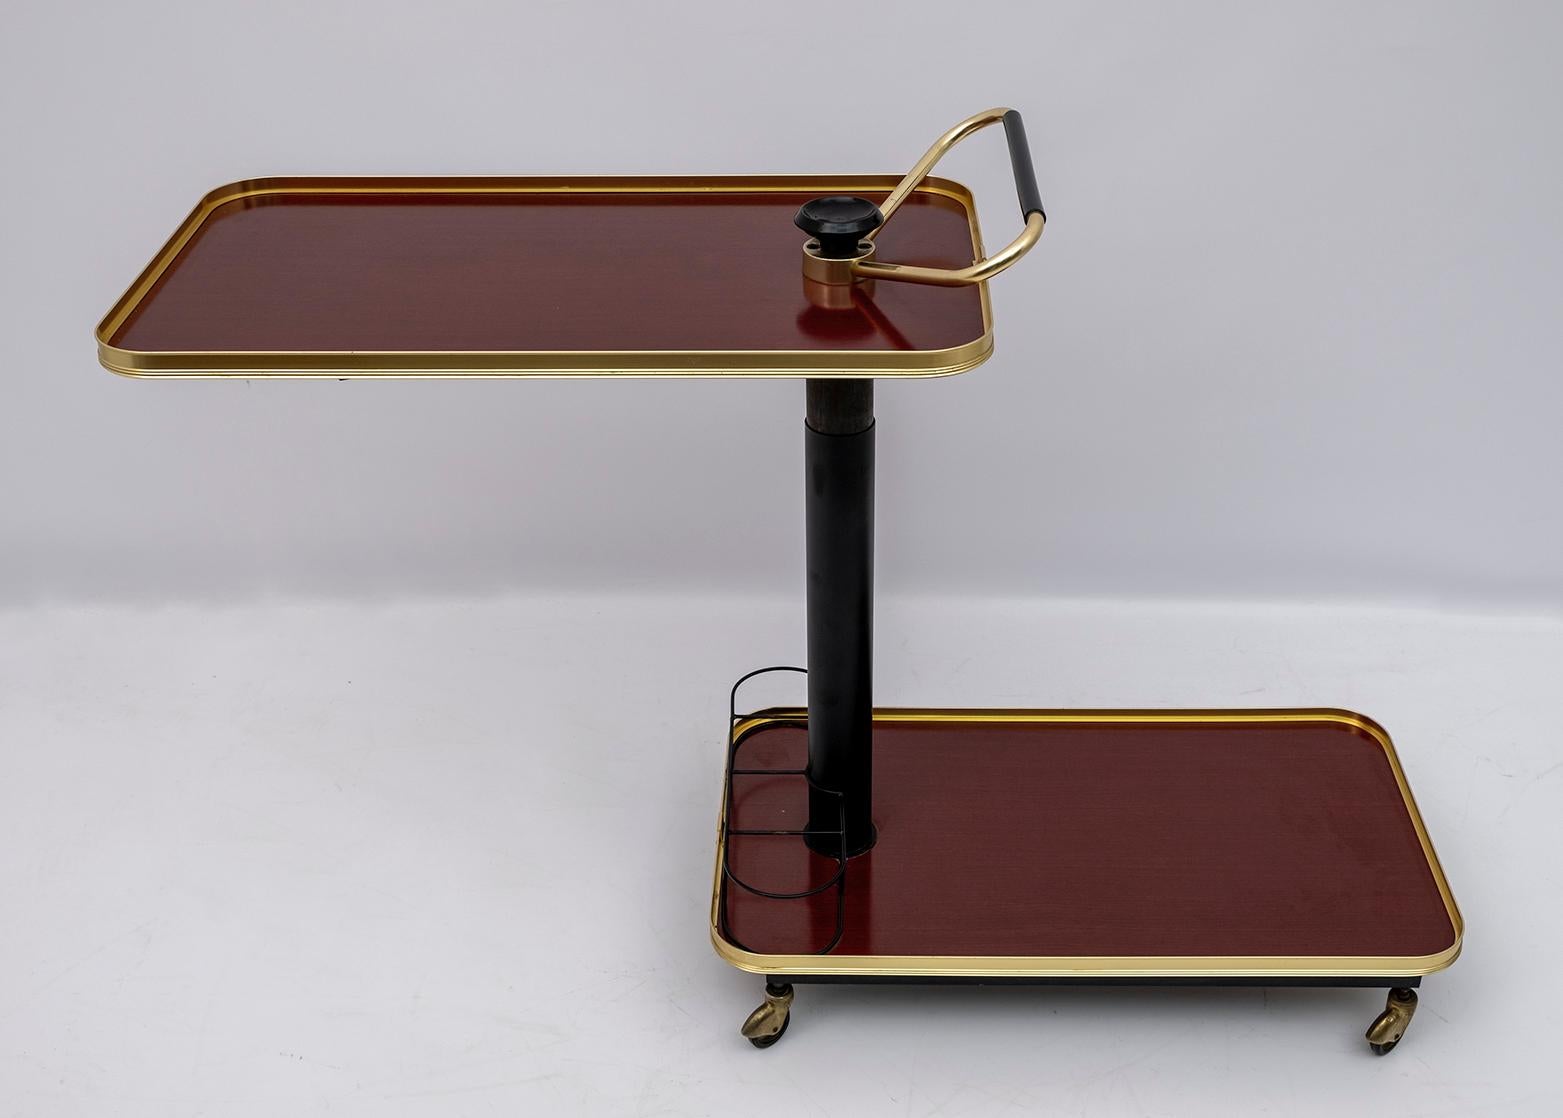 This formica and brass food trolley, was produced in Italy in the 70s, multifunctional, is adjustable in height and the upper surface, as shown in the photo, can rotate.